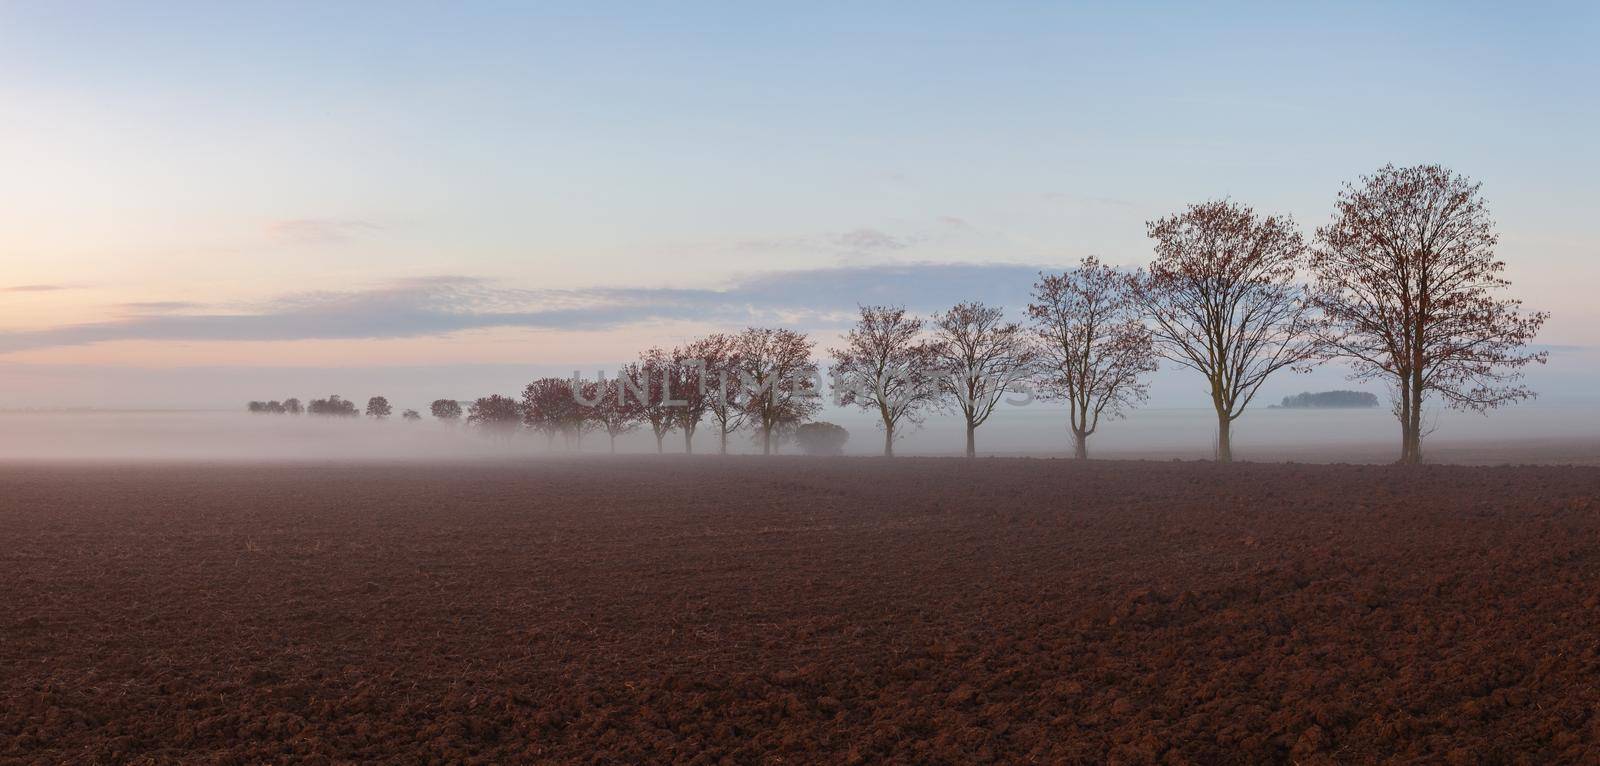 Landscape covered with fog in Central Bohemian Uplands, Czech Republic. Misty morning between fields.